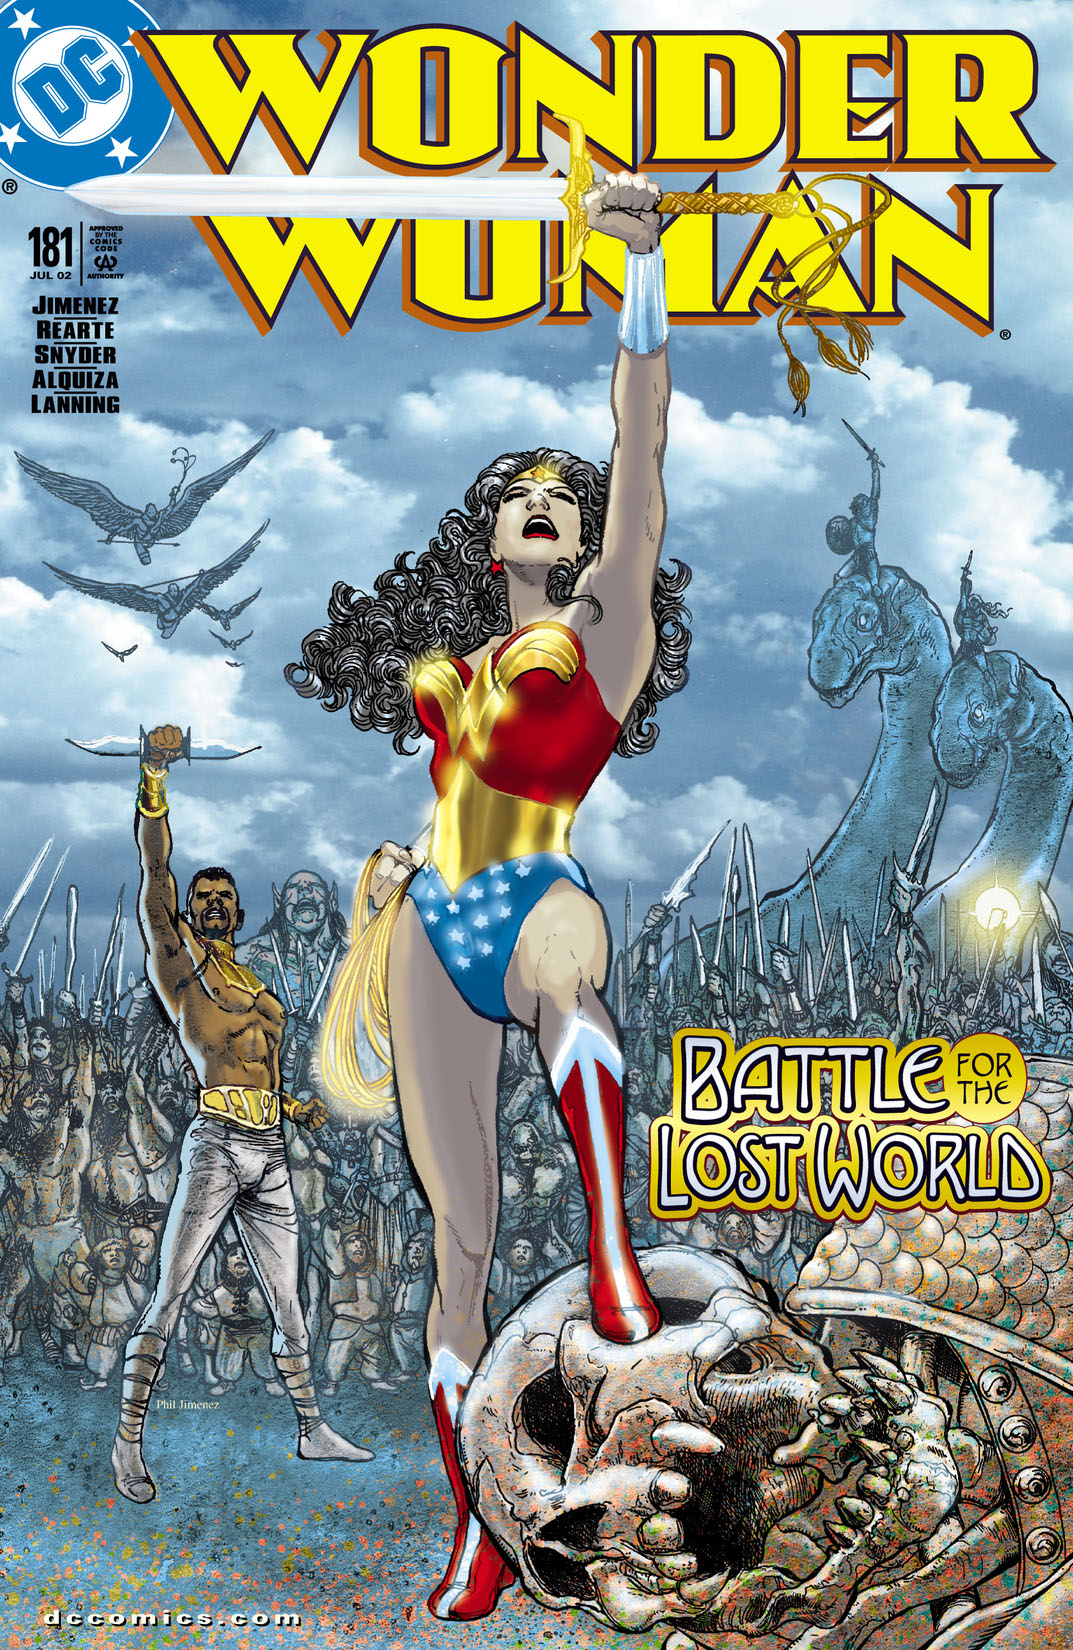 Wonder Woman (1986-) #181 preview images